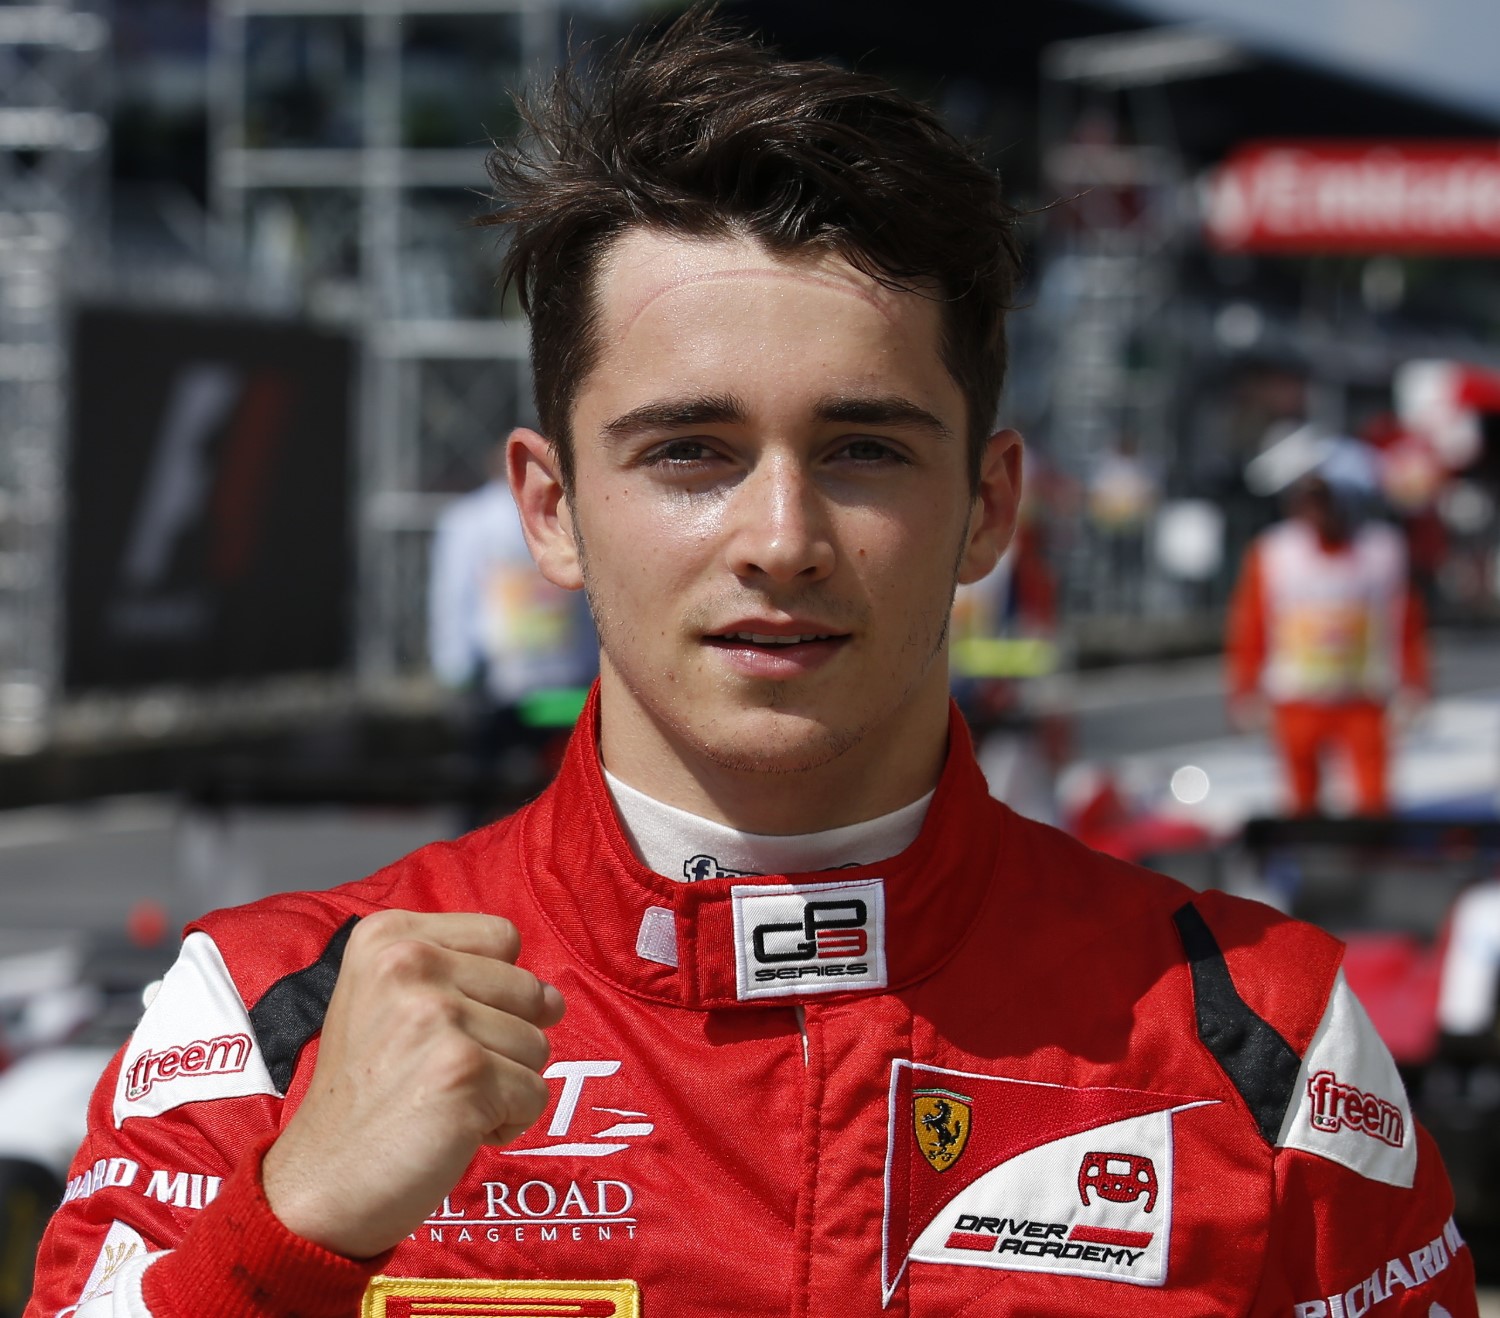 Charles Leclerc - his check must not have been big enough